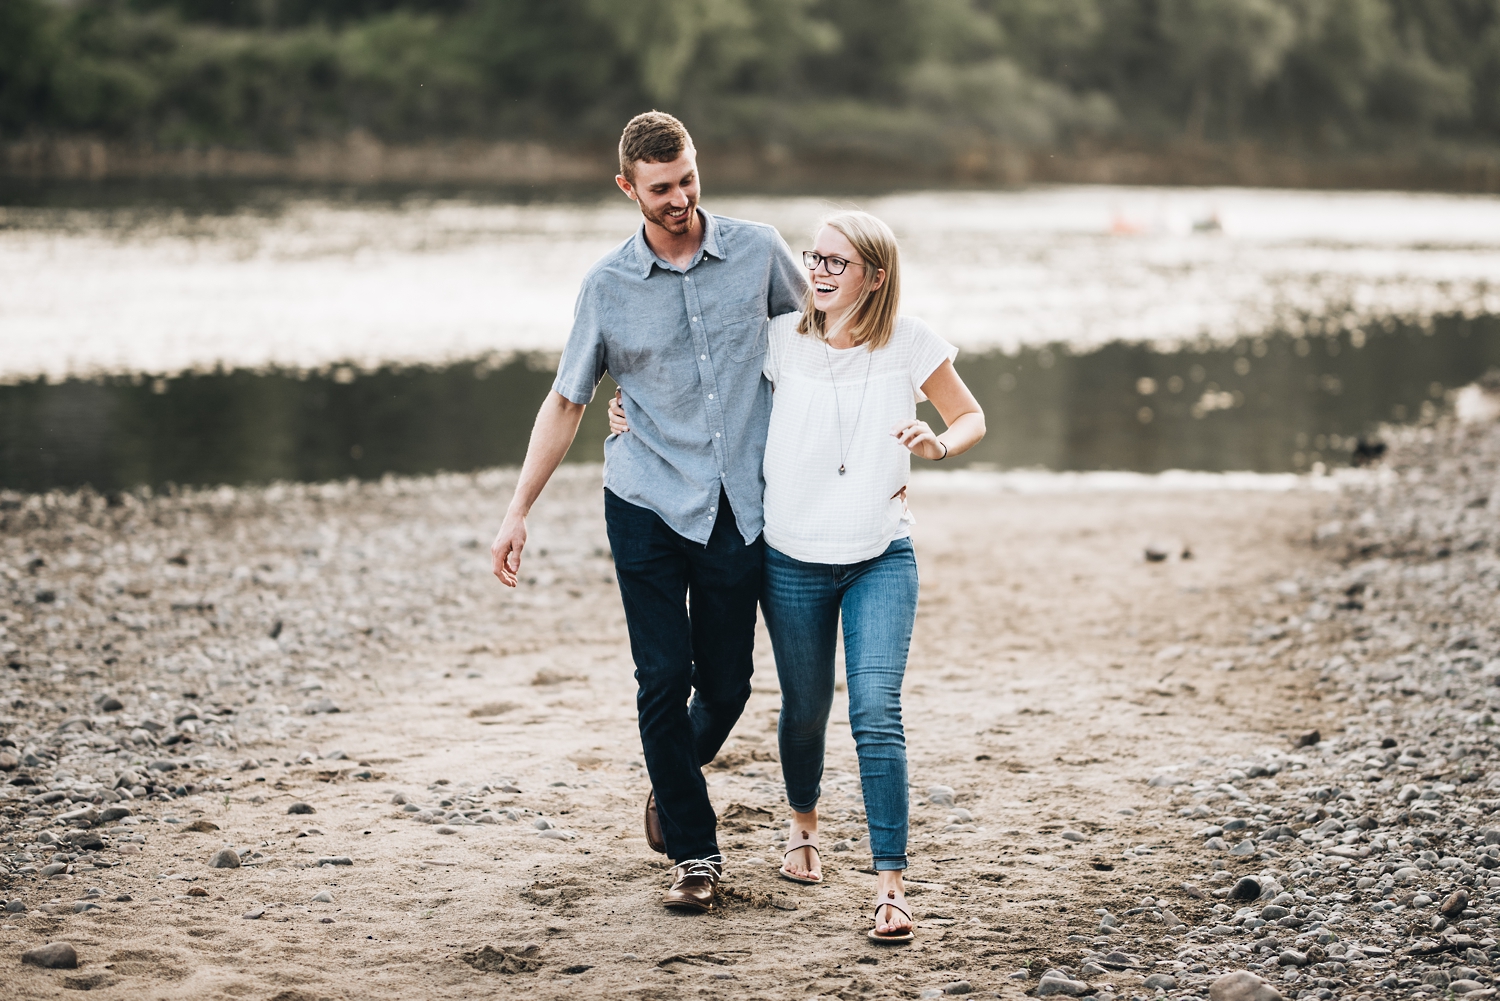 Fun Summer engagement photos in Eau Claire Wisconsin tom thornton photography